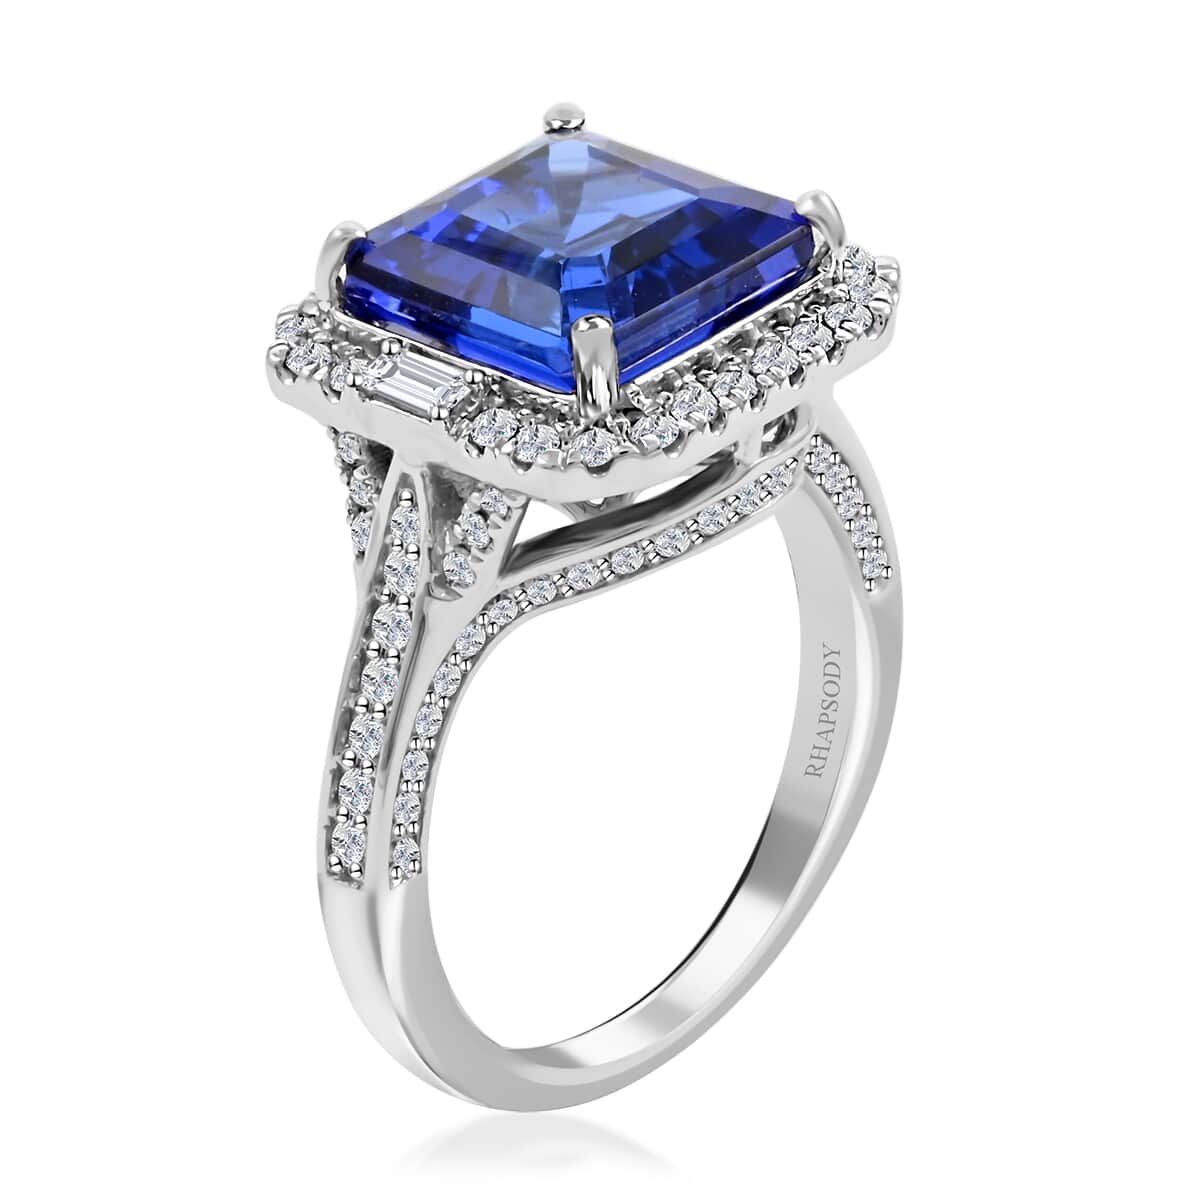 Certified Rhapsody 950 Platinum AAAA Asscher Cut Tanzanite and E-F VS Diamond Ring 8.50 Grams 5.50 ctw (Del. in 15-20 Days) image number 3